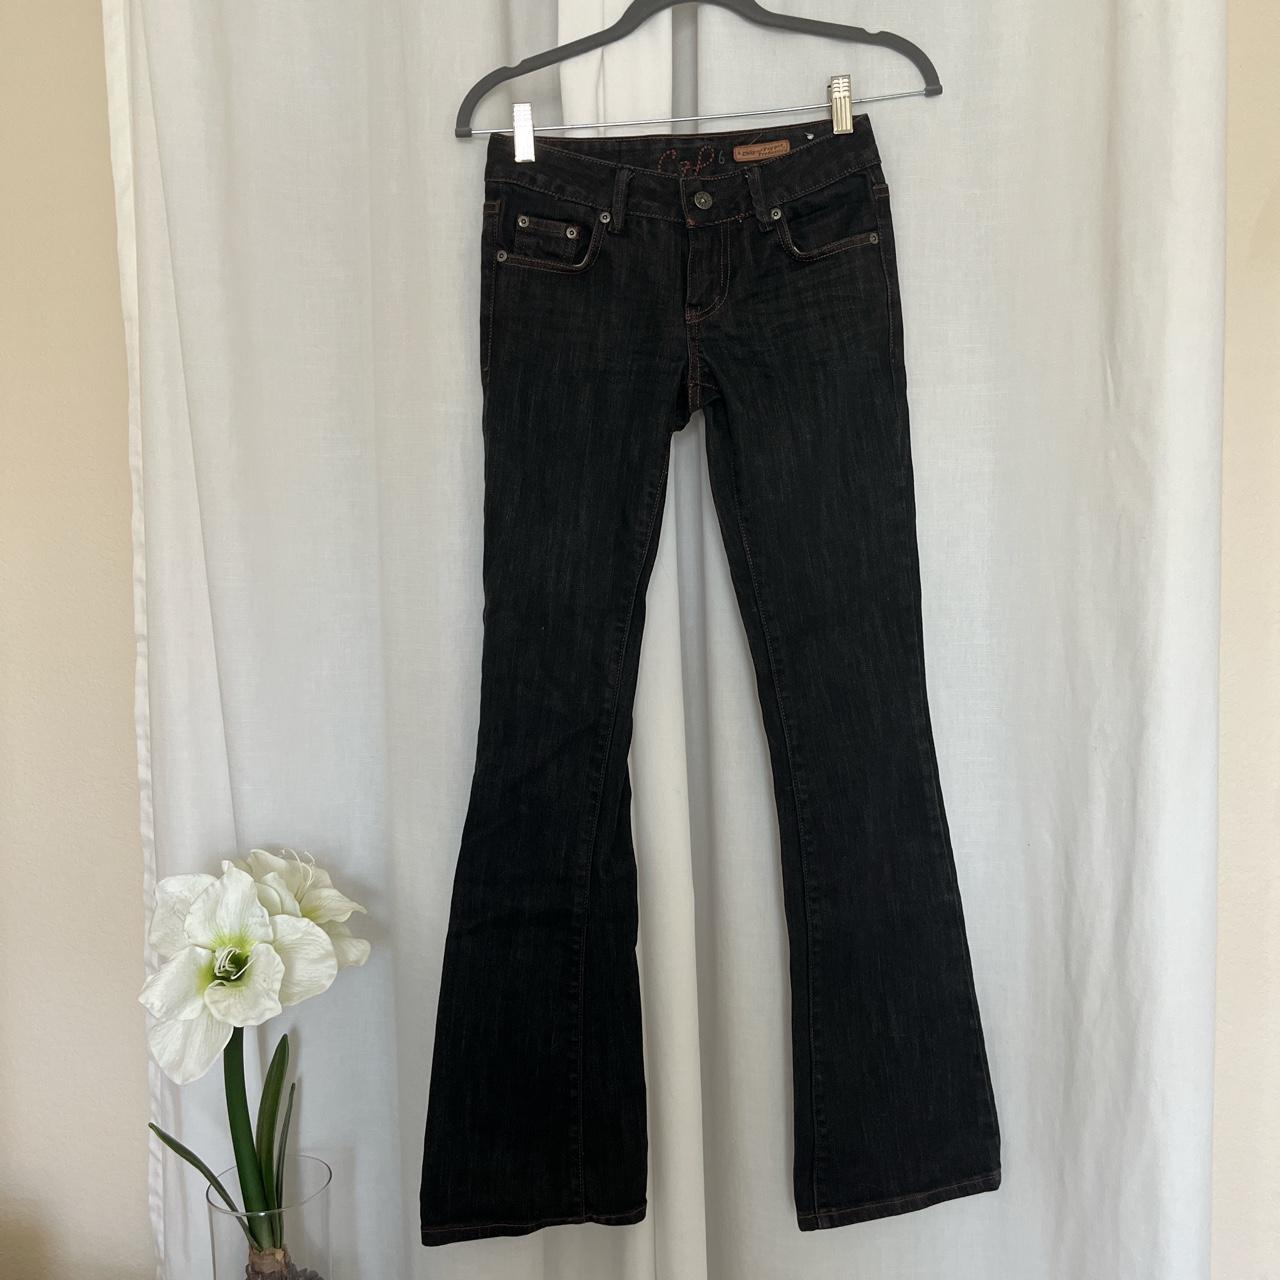 Low rise flare black jeans with rust stitching! A... - Depop